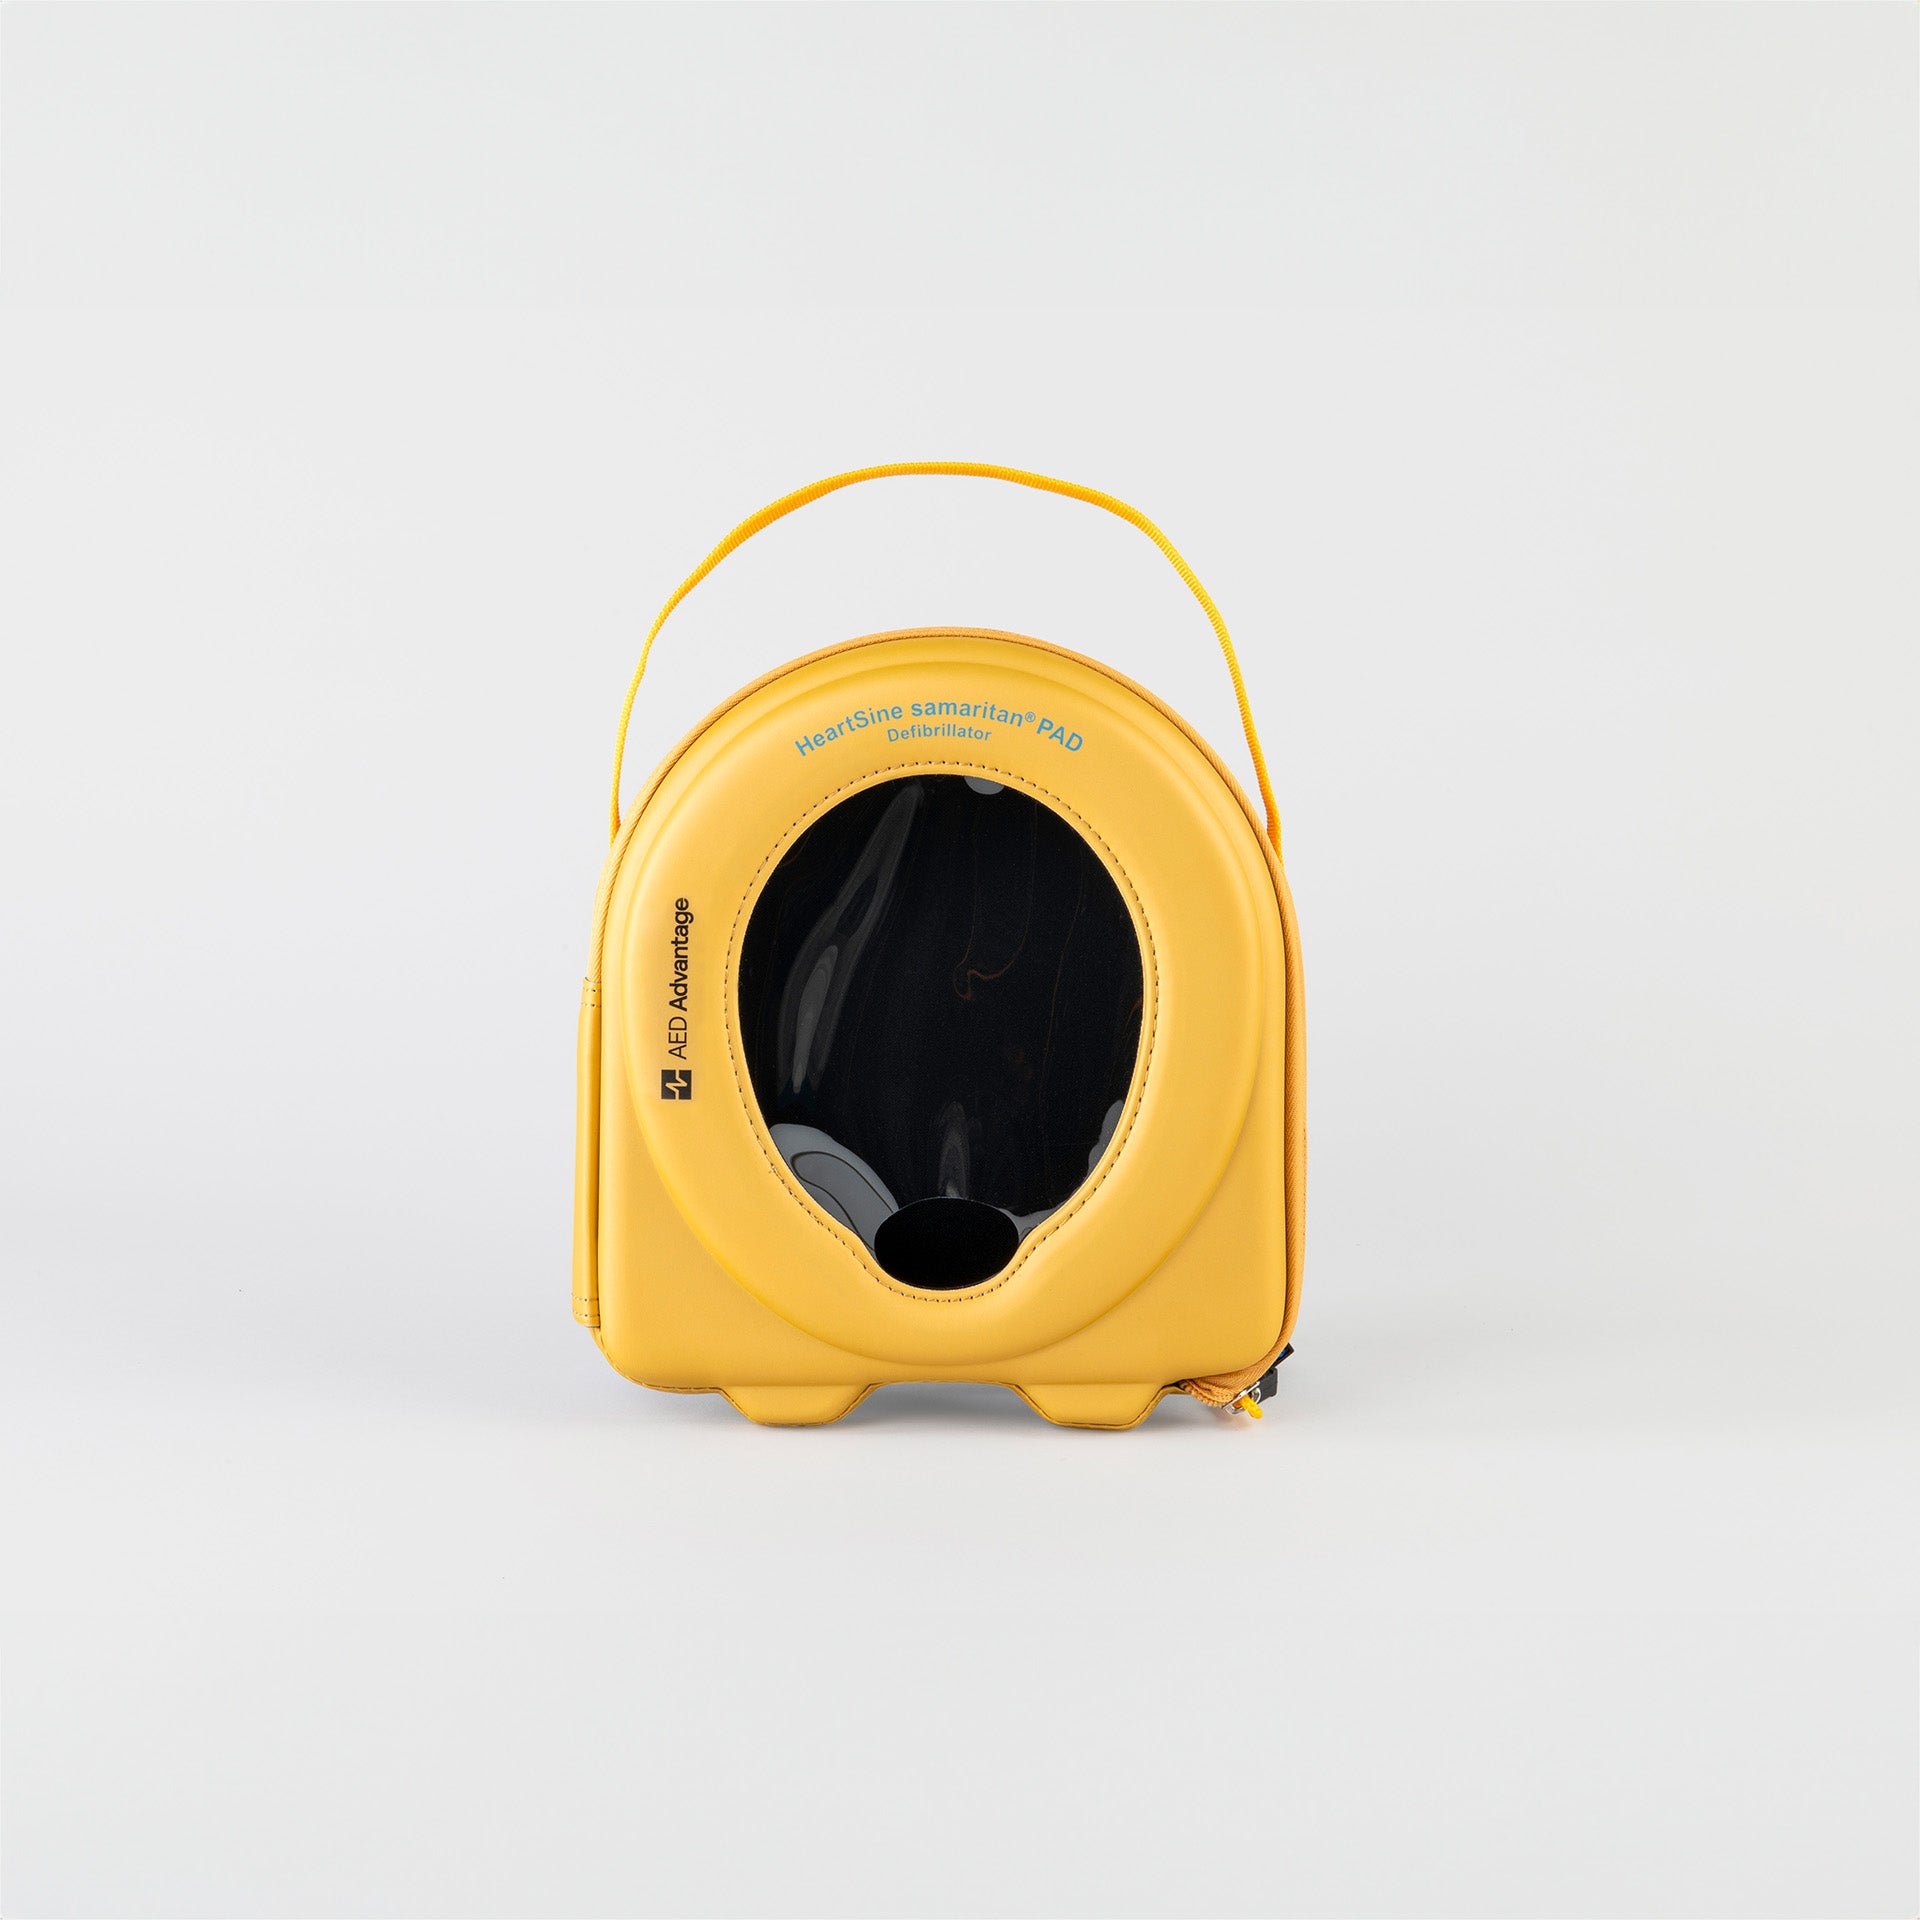 A bright yellow round soft carry case for the HeartSine AED, with a yellow strap carry handle